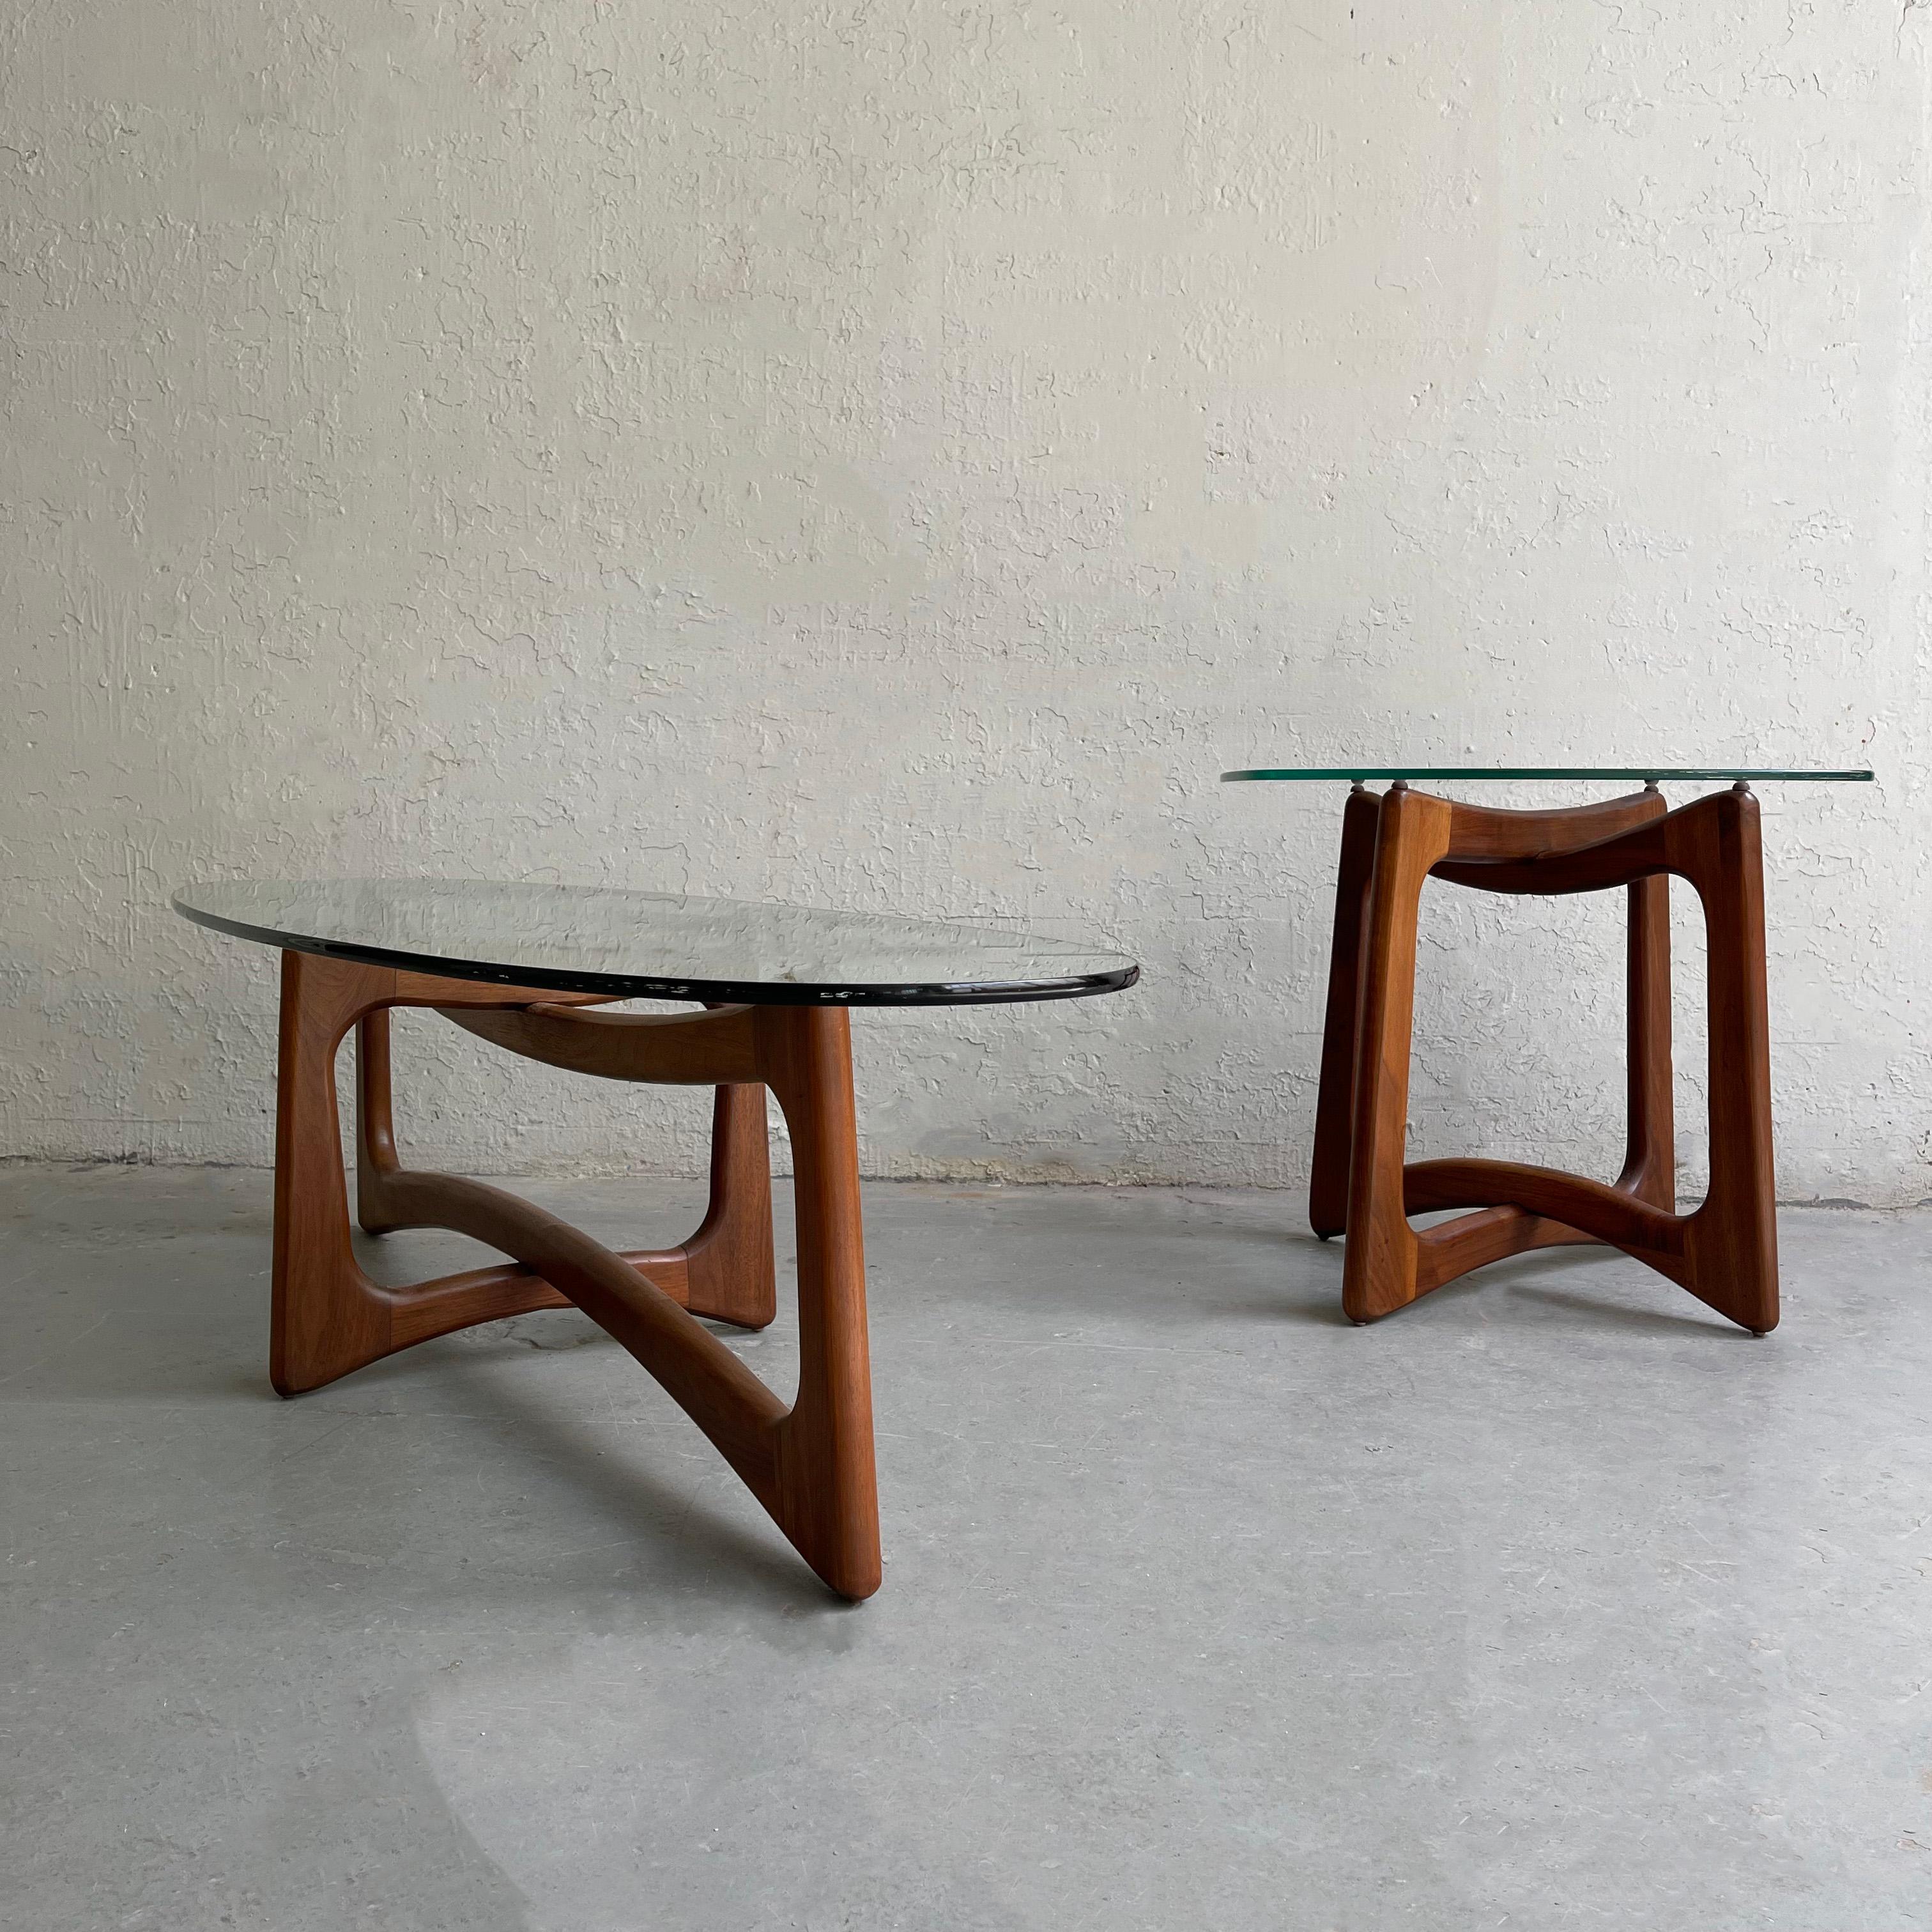 Sculptural Walnut Coffee Table By Adrian Pearsall, Craft Associates 3